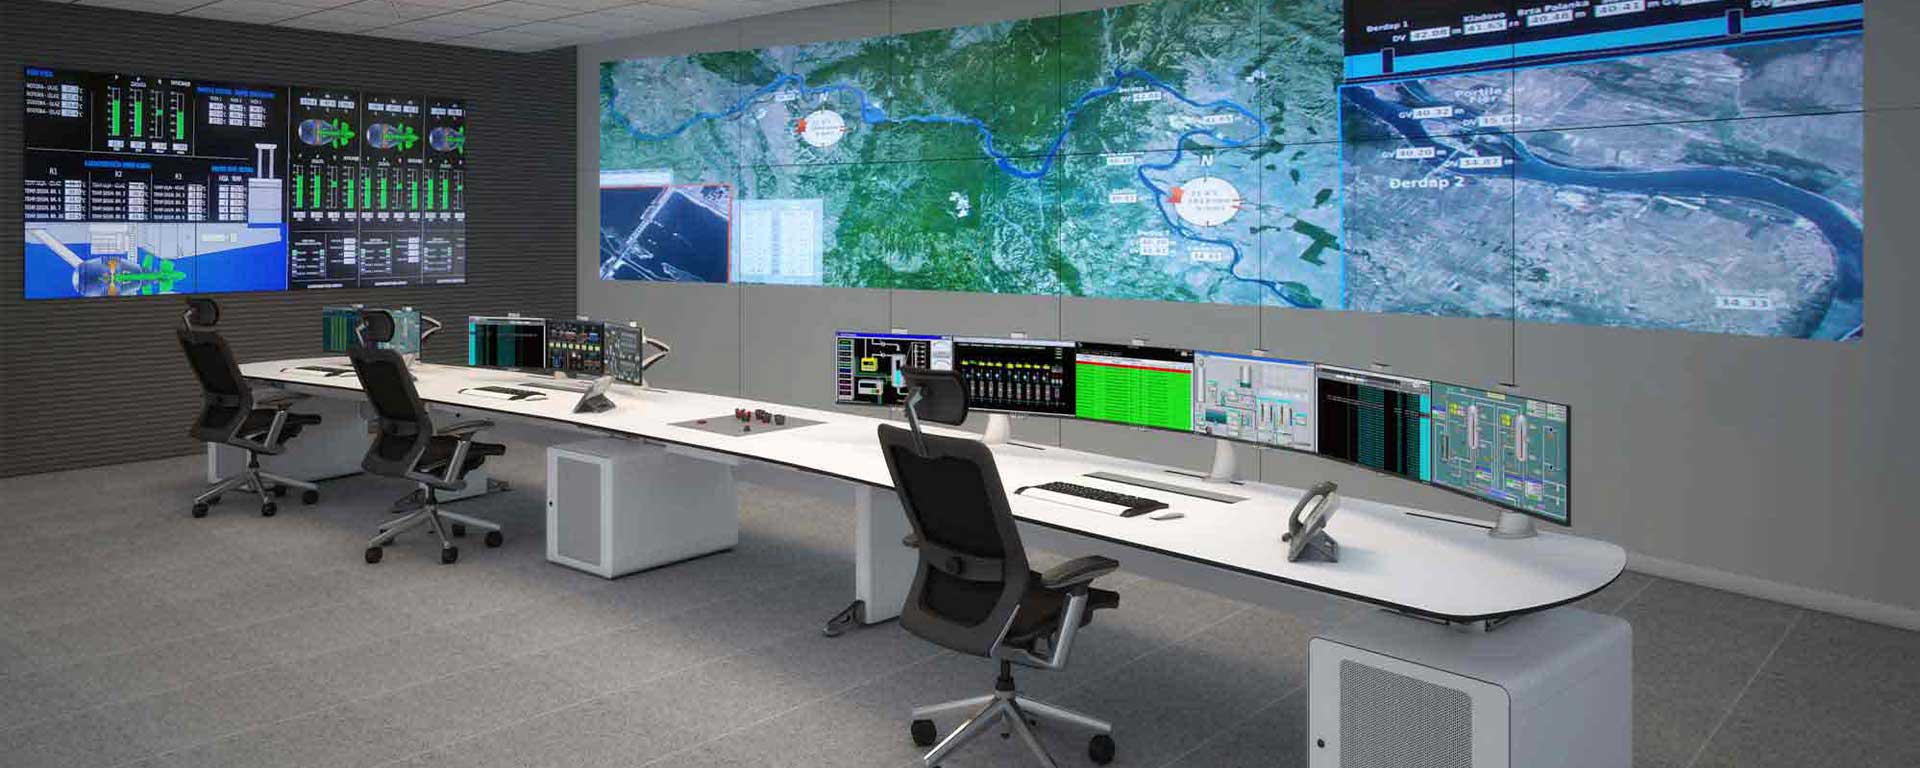 security operations center video walls in kenya